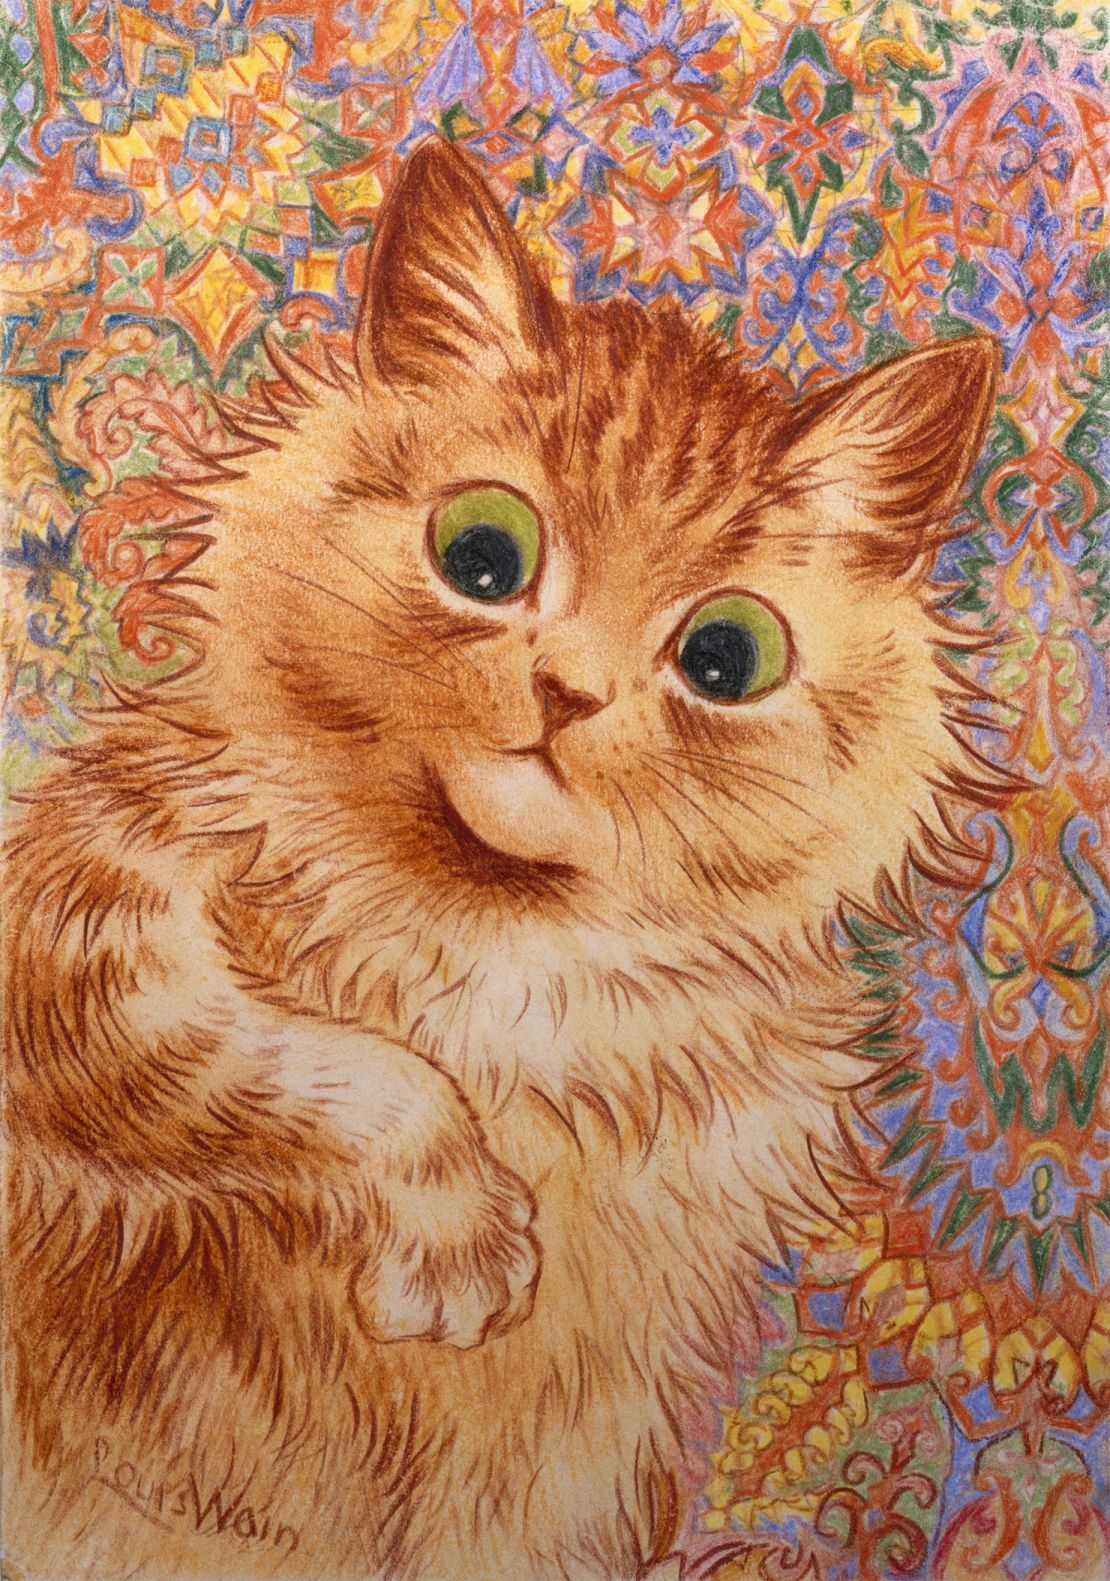 One of Louis Wain's famous images of cats. The Edwardian artist is credited with increasing the cute appeal of our feline friends by giving them human hobbies and pastimes.